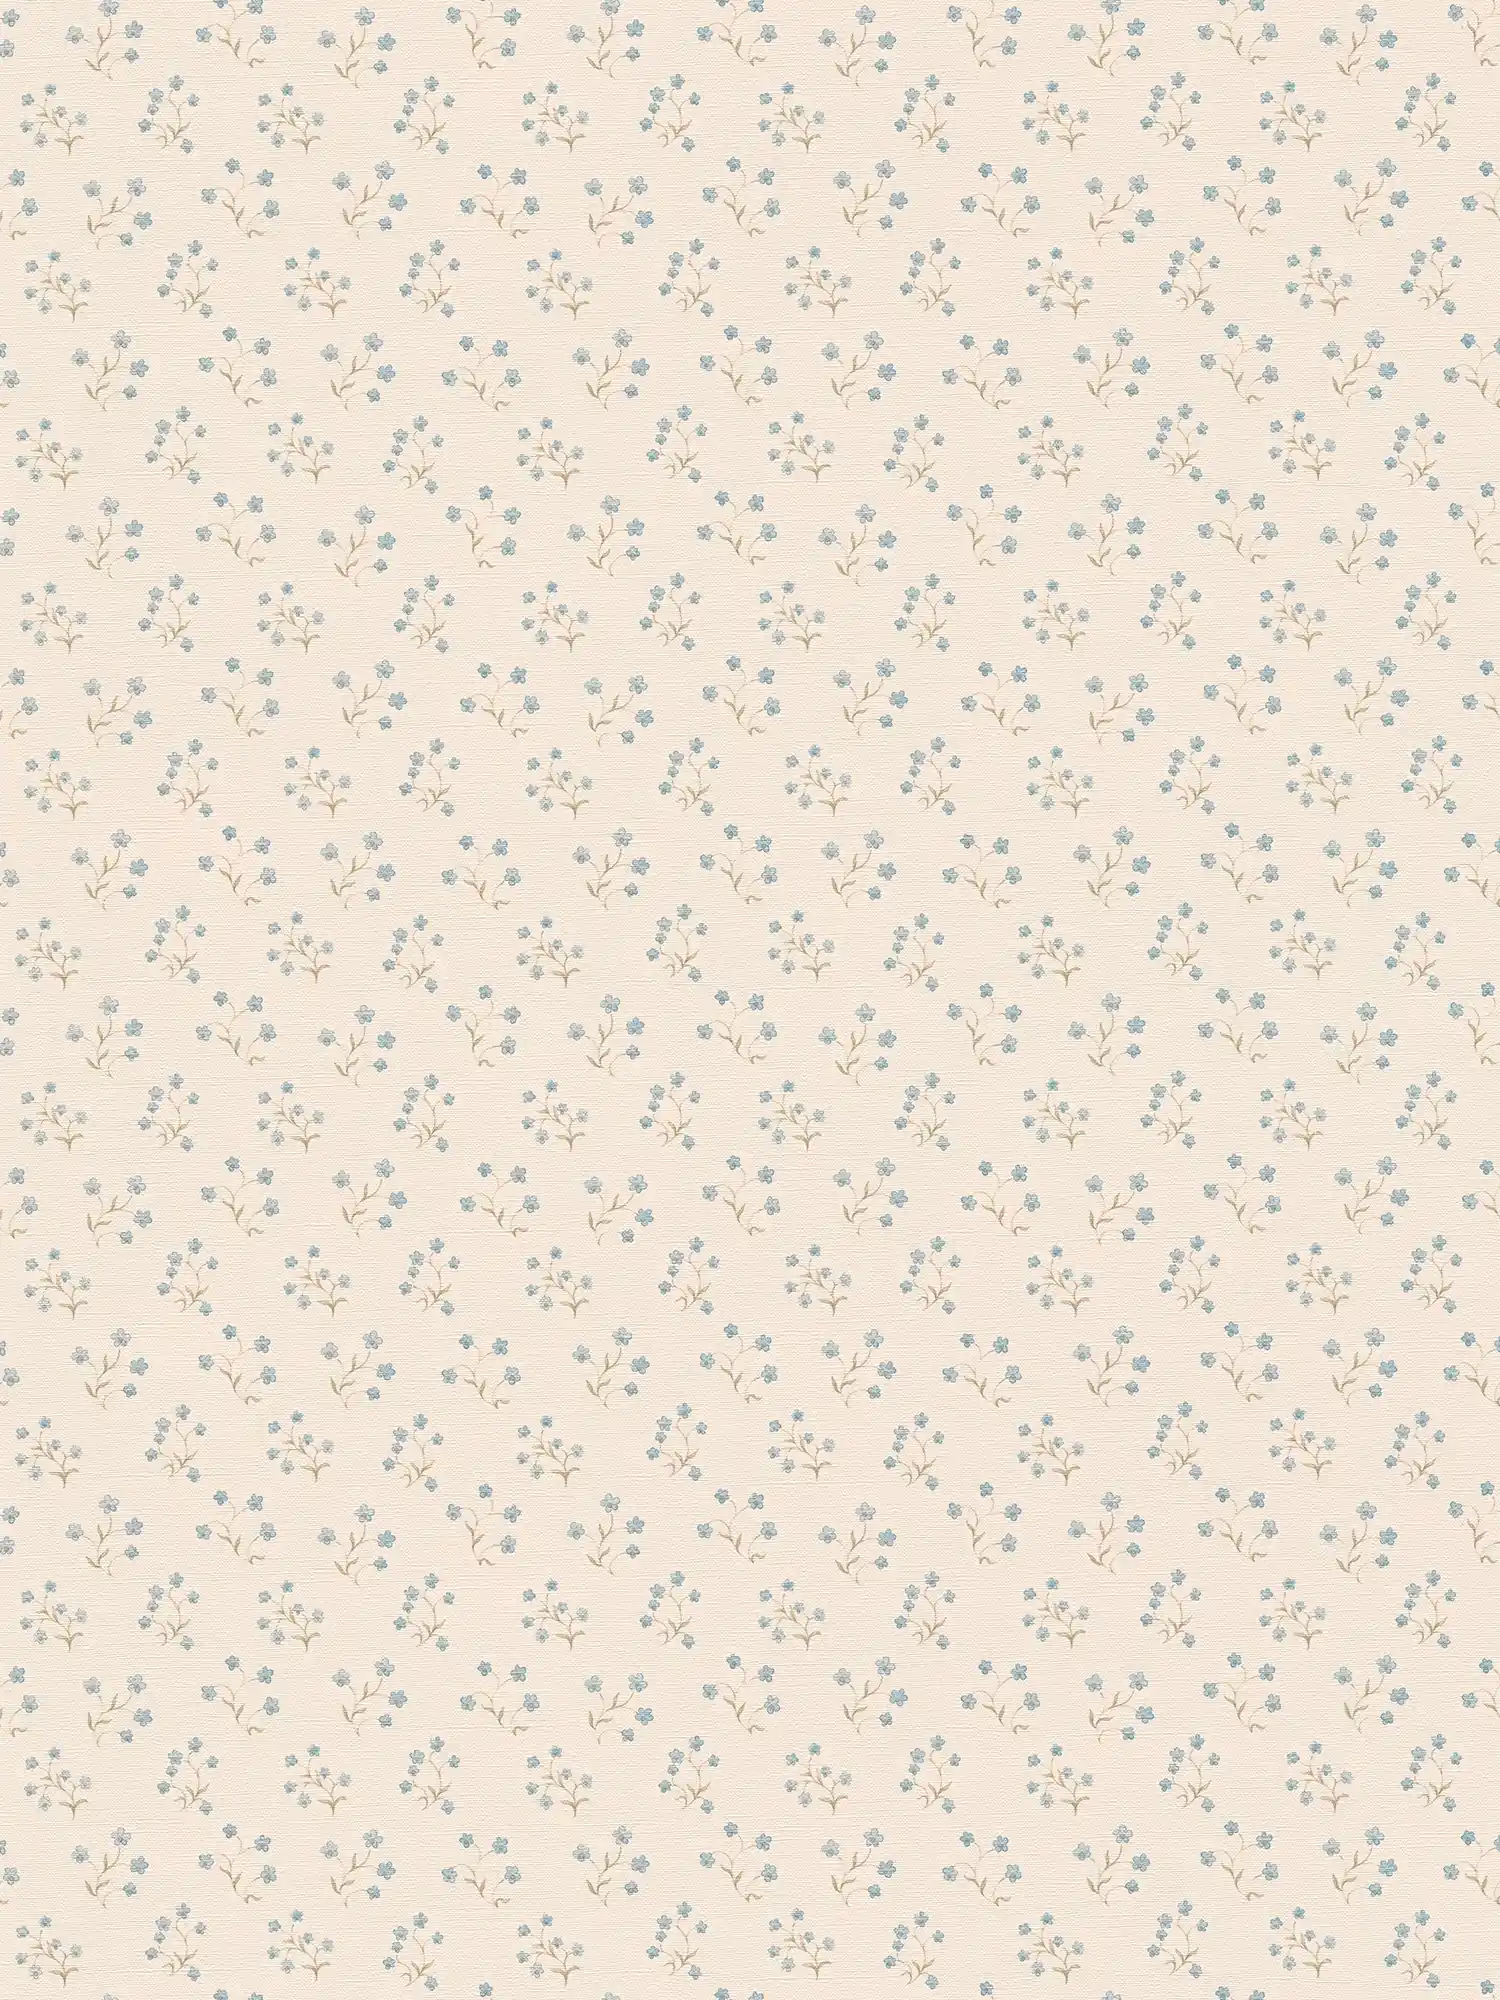 Floral wallpaper with small country house pattern - cream, blue, grey
